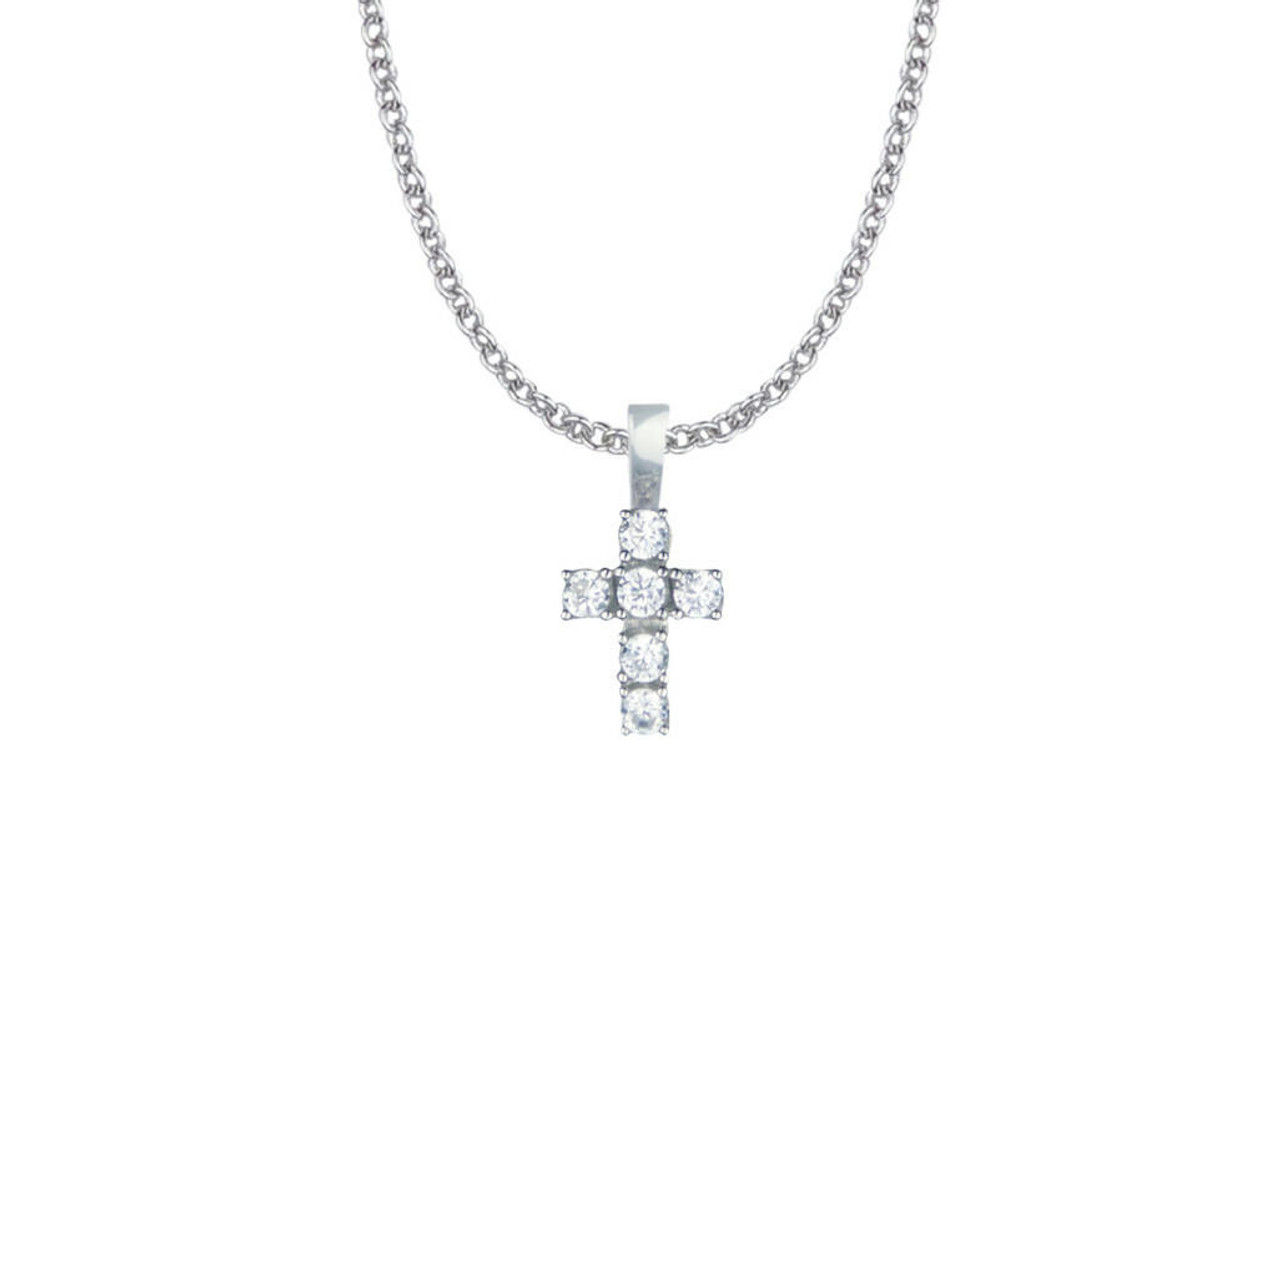 Small Cubic Zirconium Stones Cross Necklace - Sterling Silver Pendant On  16